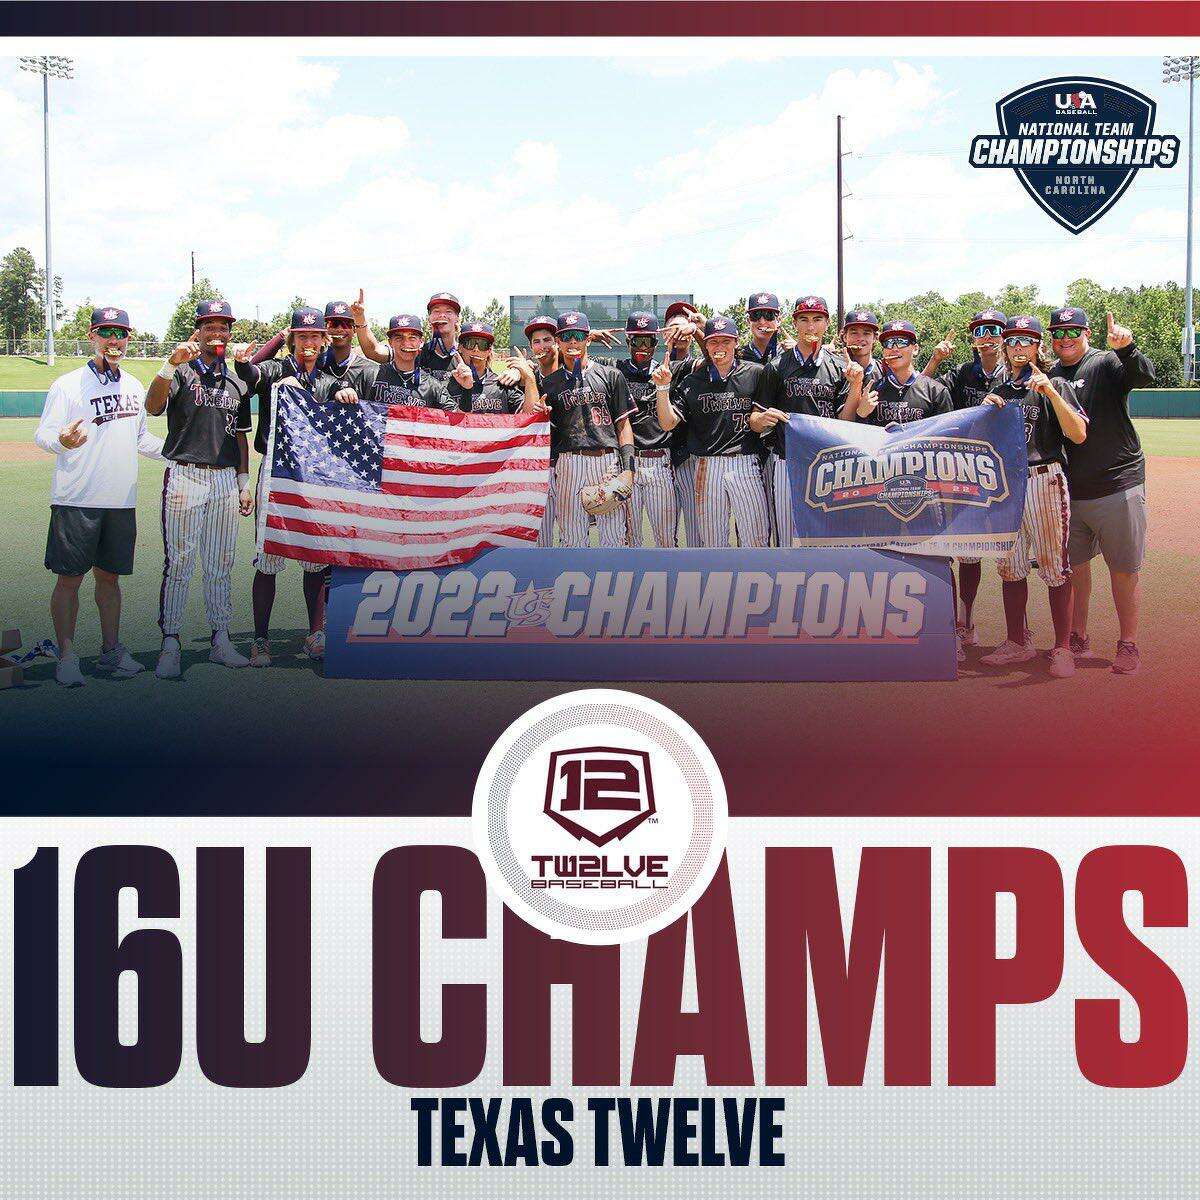 Texas Twelve won the 16U National Team Championships, June 21-25 at the USA Baseball National Training Complex in Cary, North Carolina. The team won six of seven games, outscoring opponents 37-19.